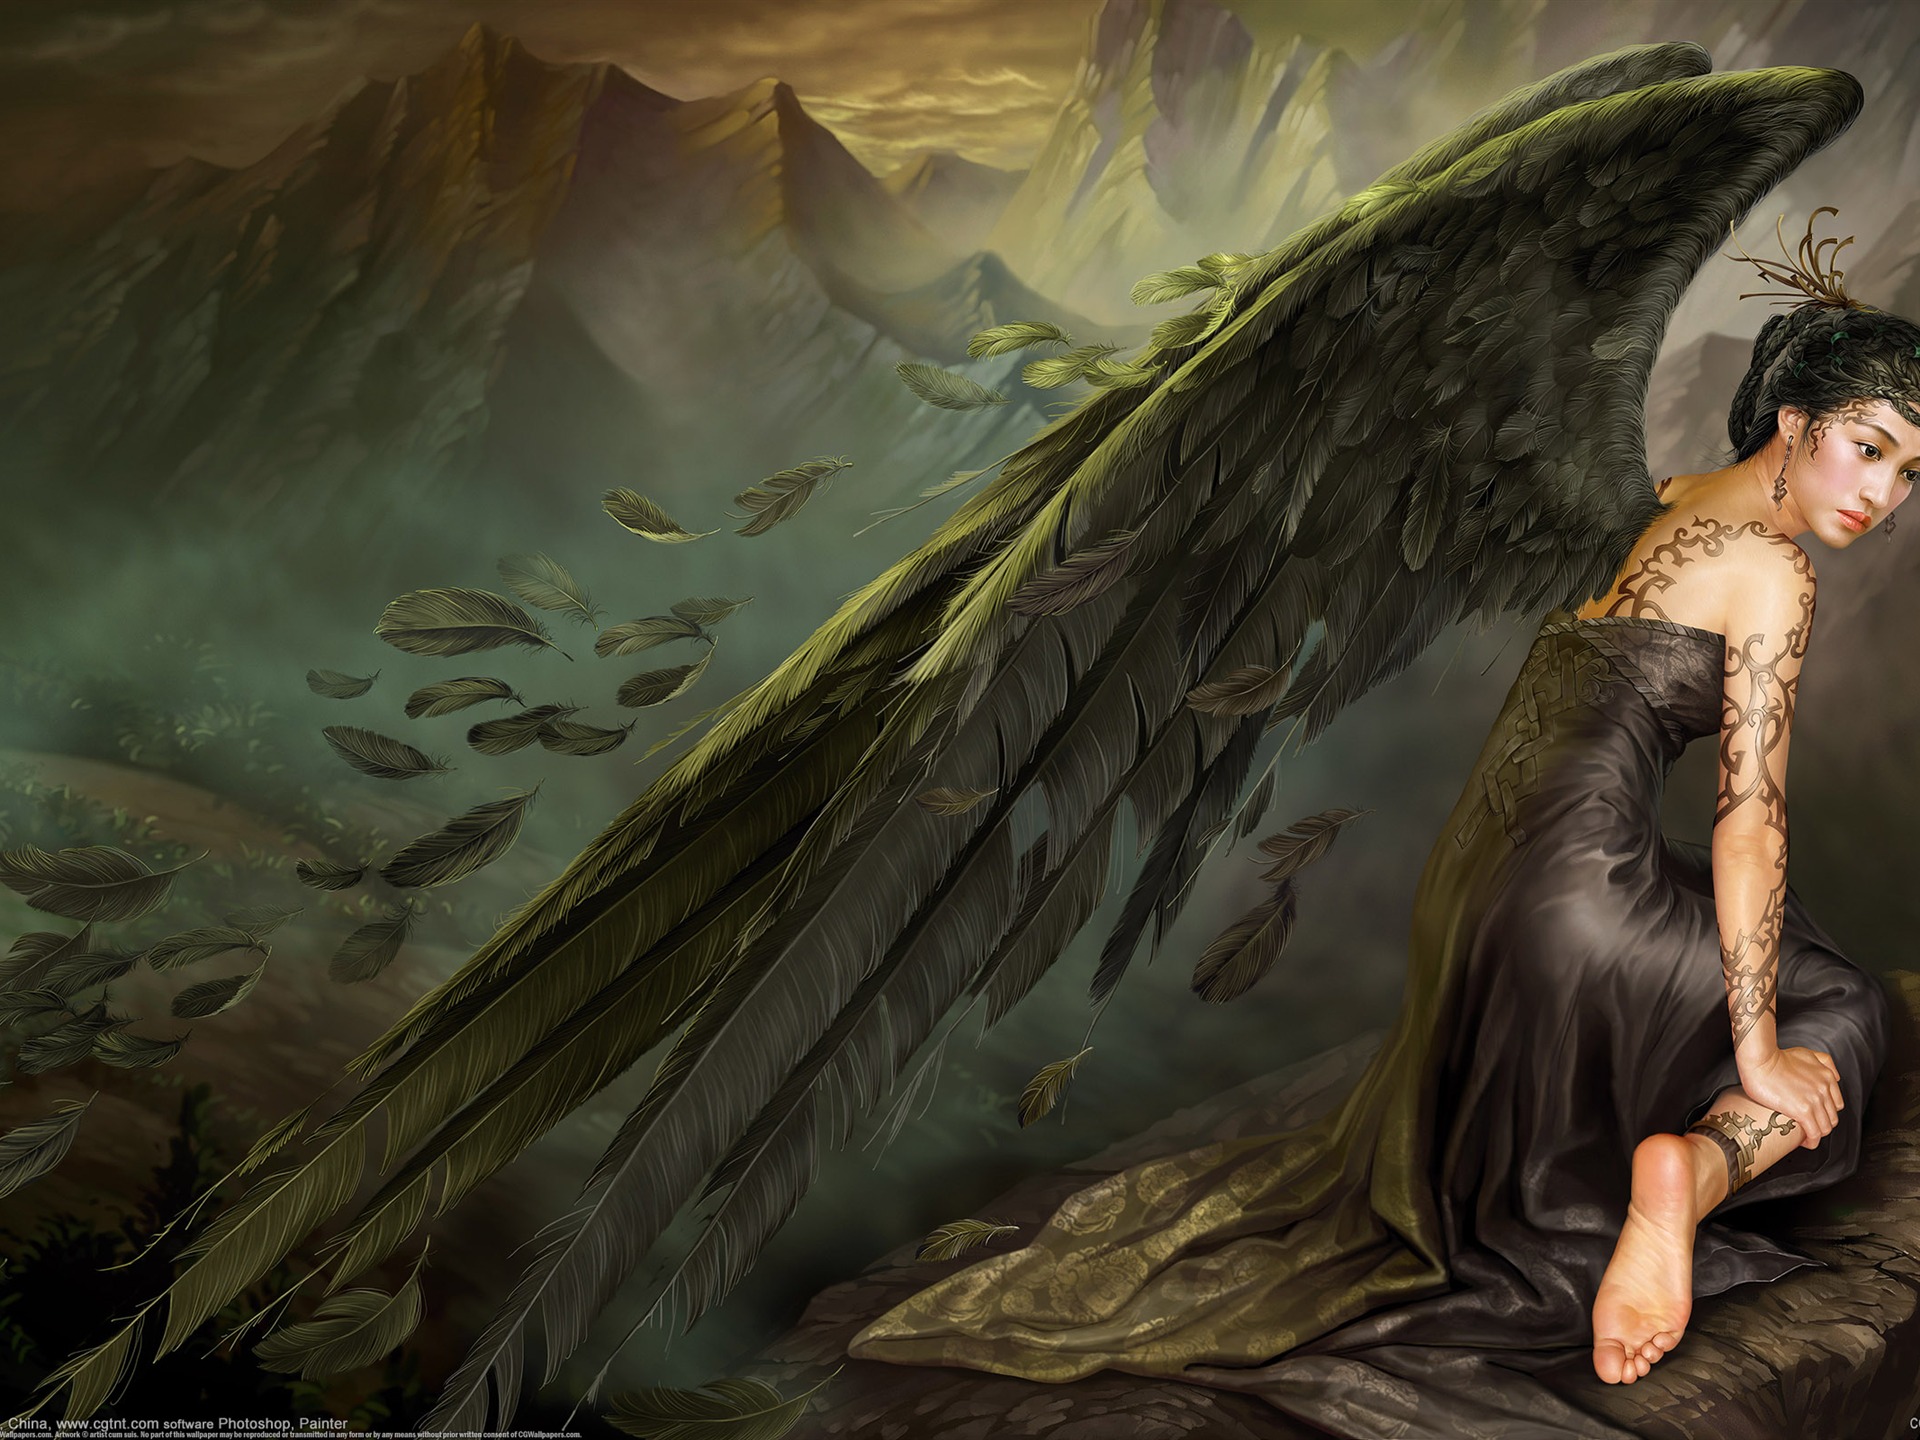 Wallpaper girl with wings sitting on a stone - Angels